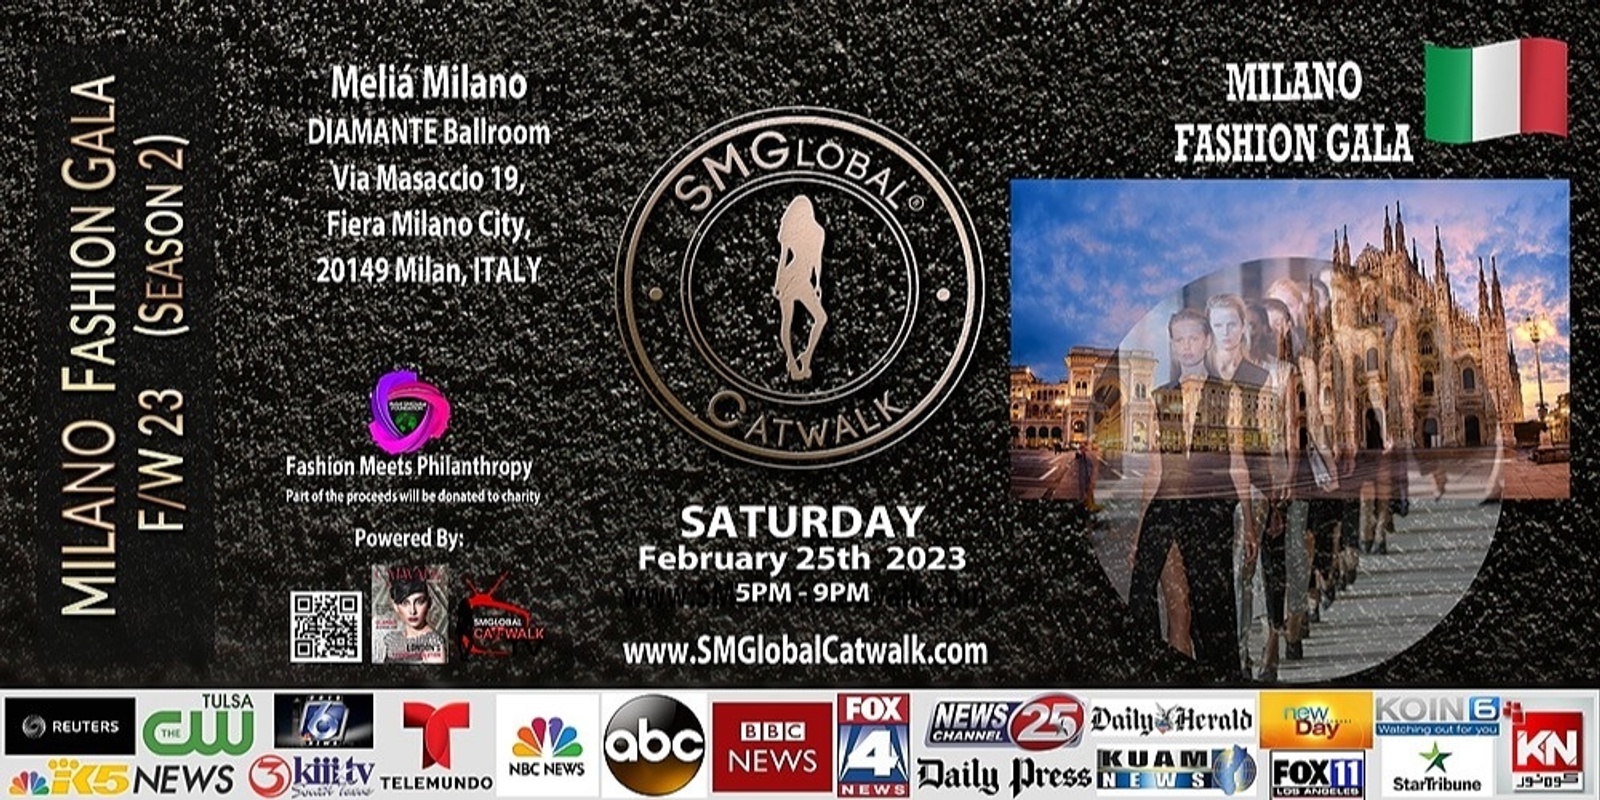 Banner image for MILANO FASHION GALA  (F/W 23 ) February 25th 2023